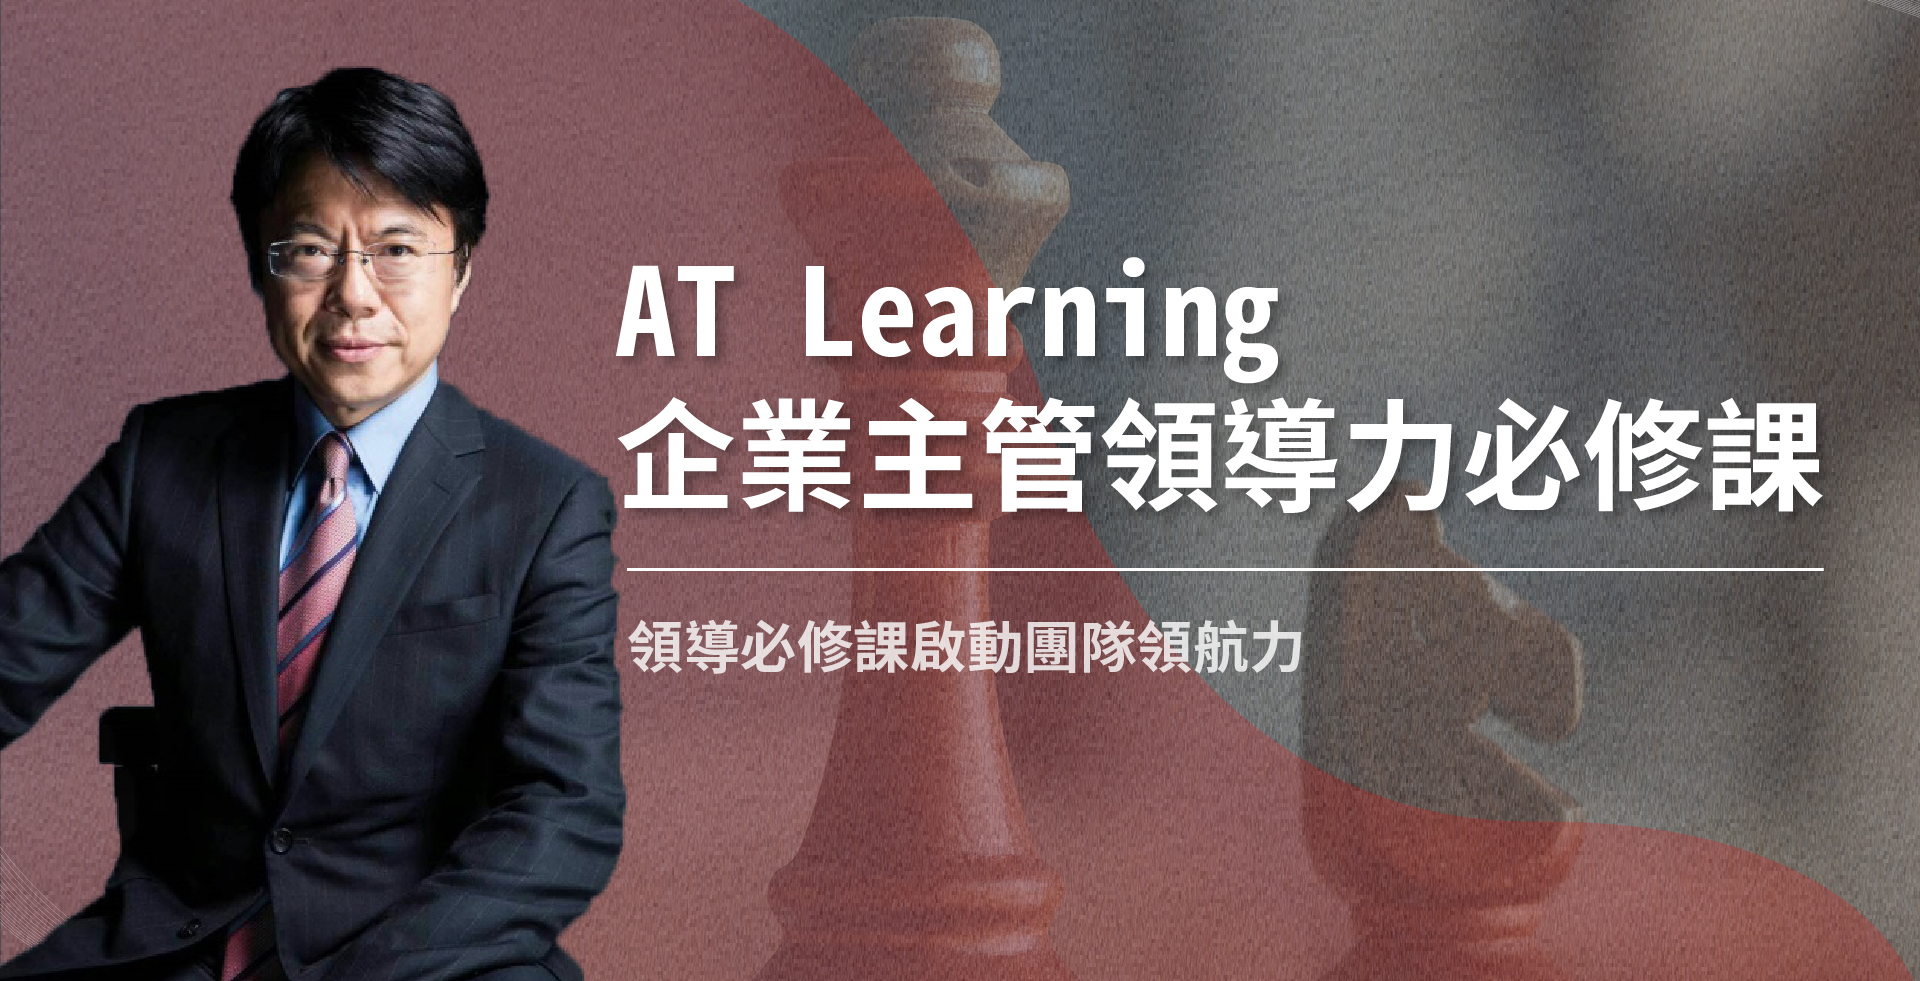 Read more about the article AT Learning企業主管領導力必修課